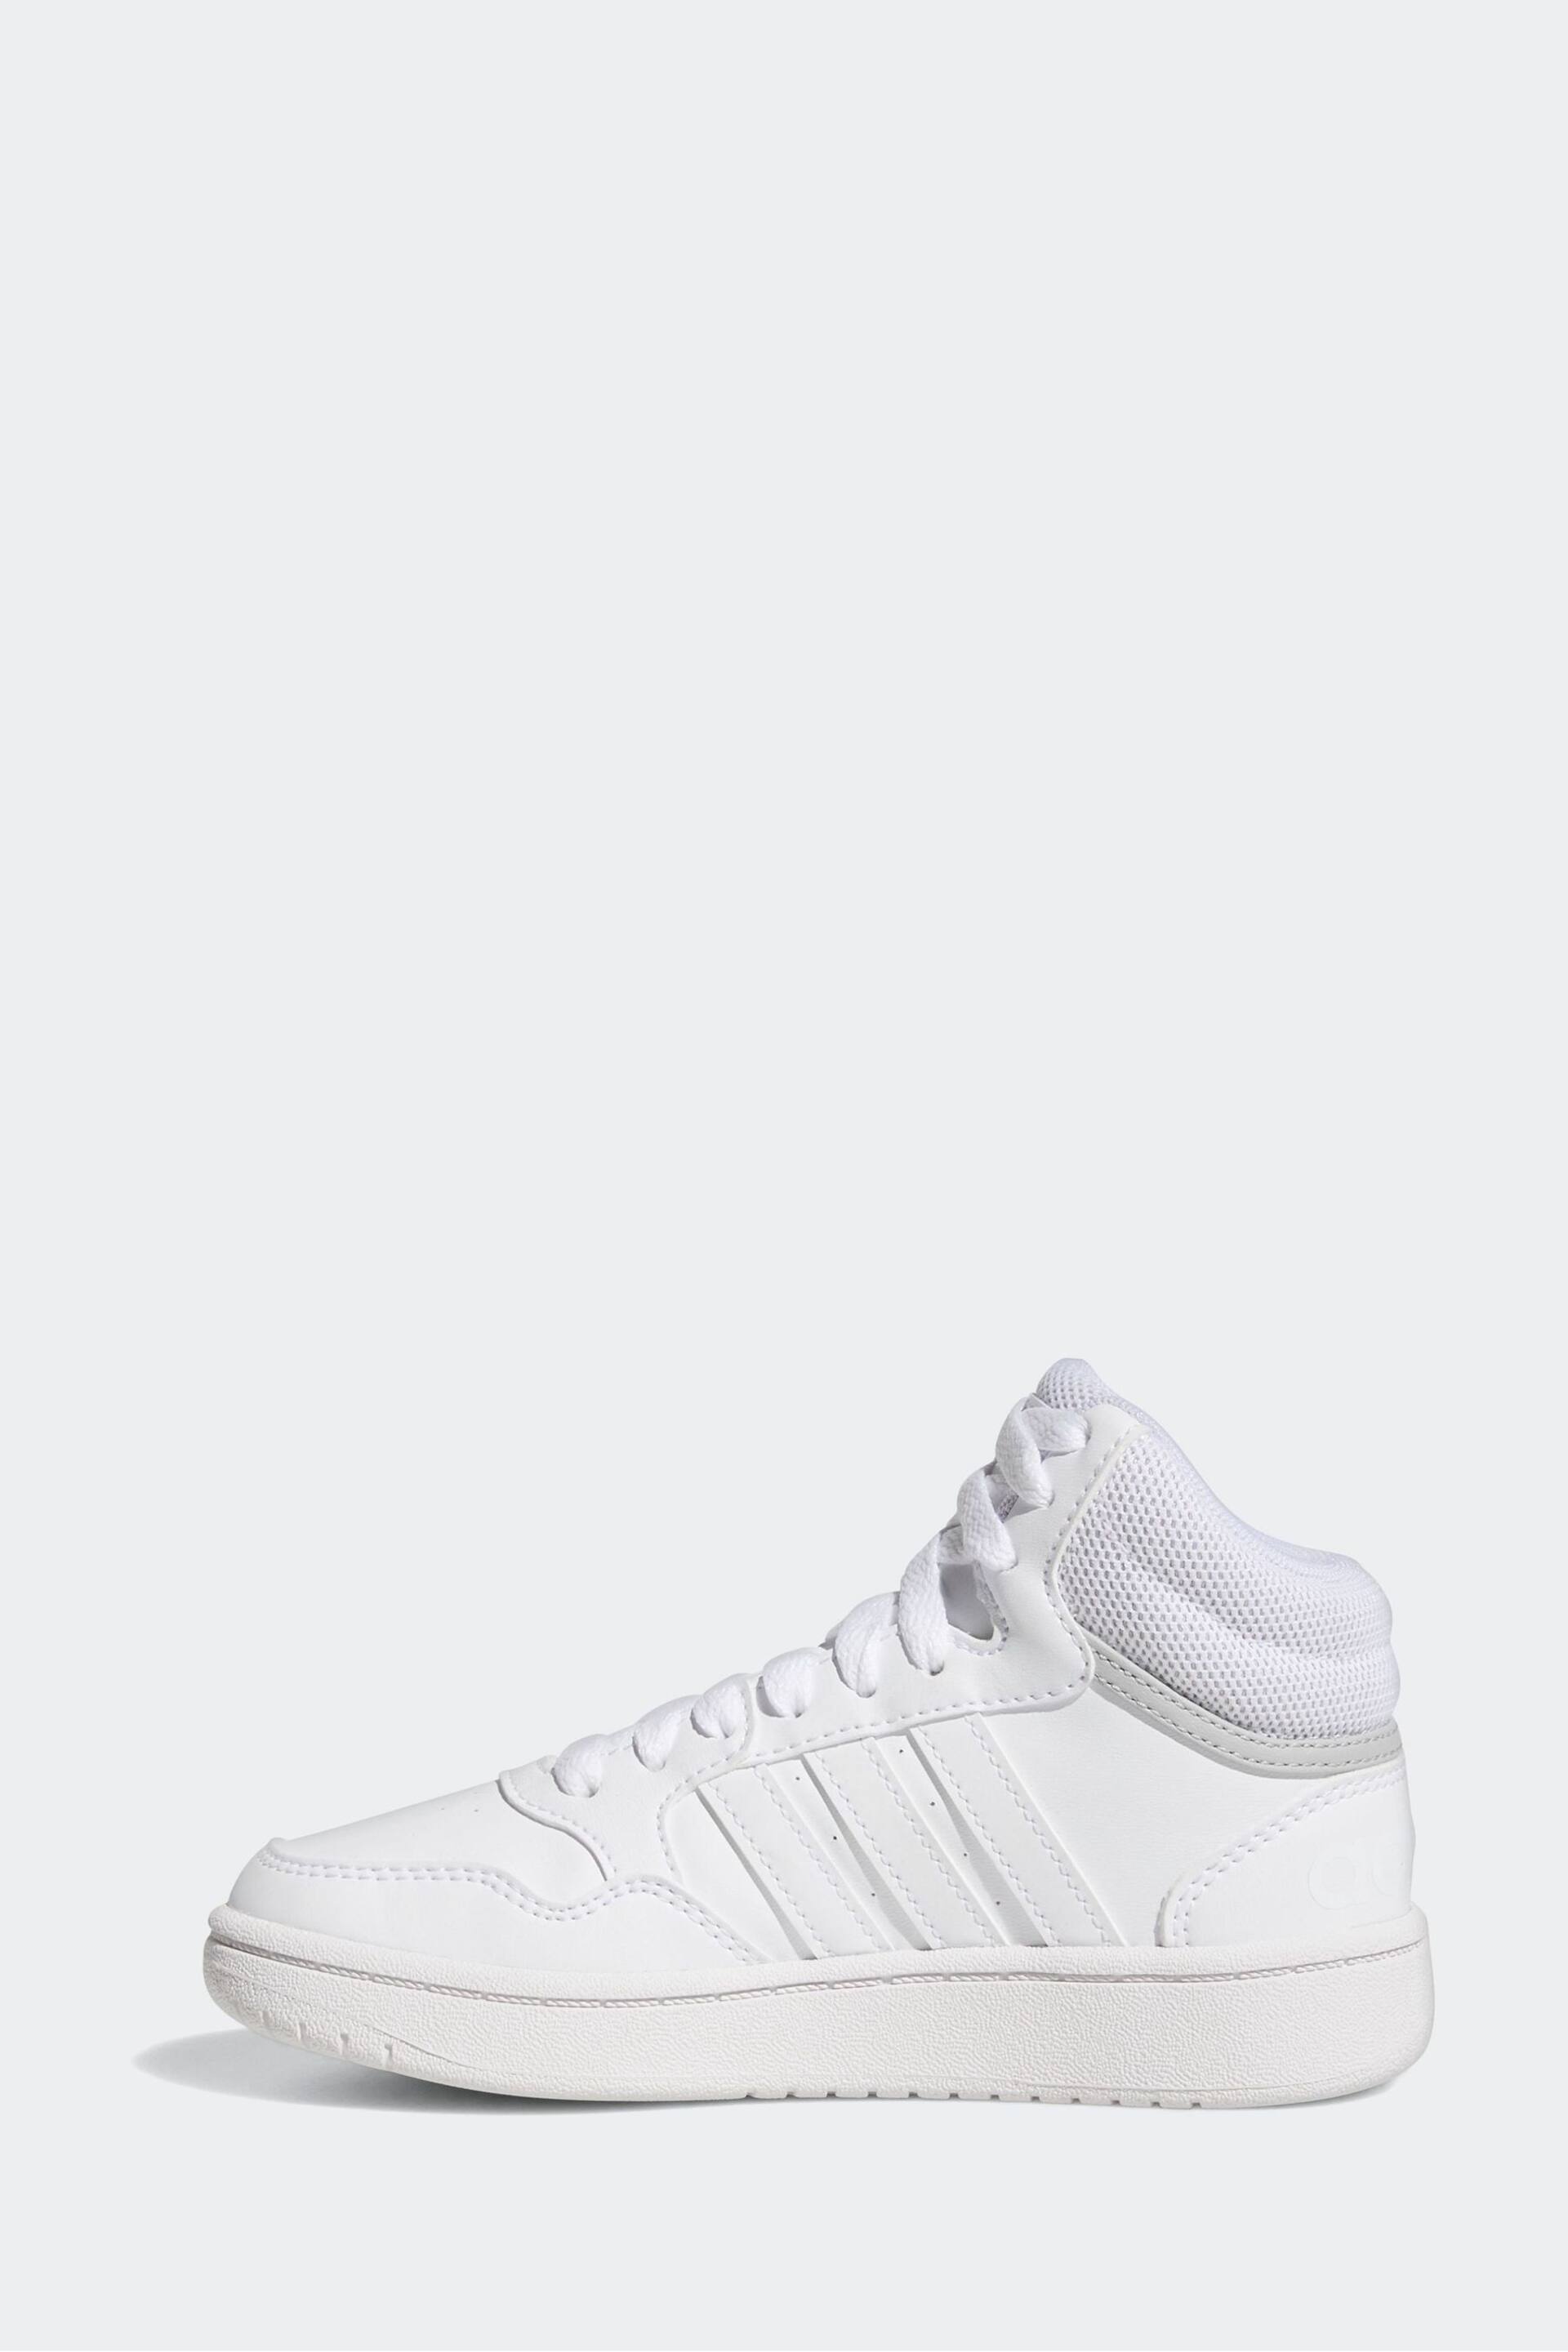 adidas White Hoops Mid Shoes - Image 2 of 9